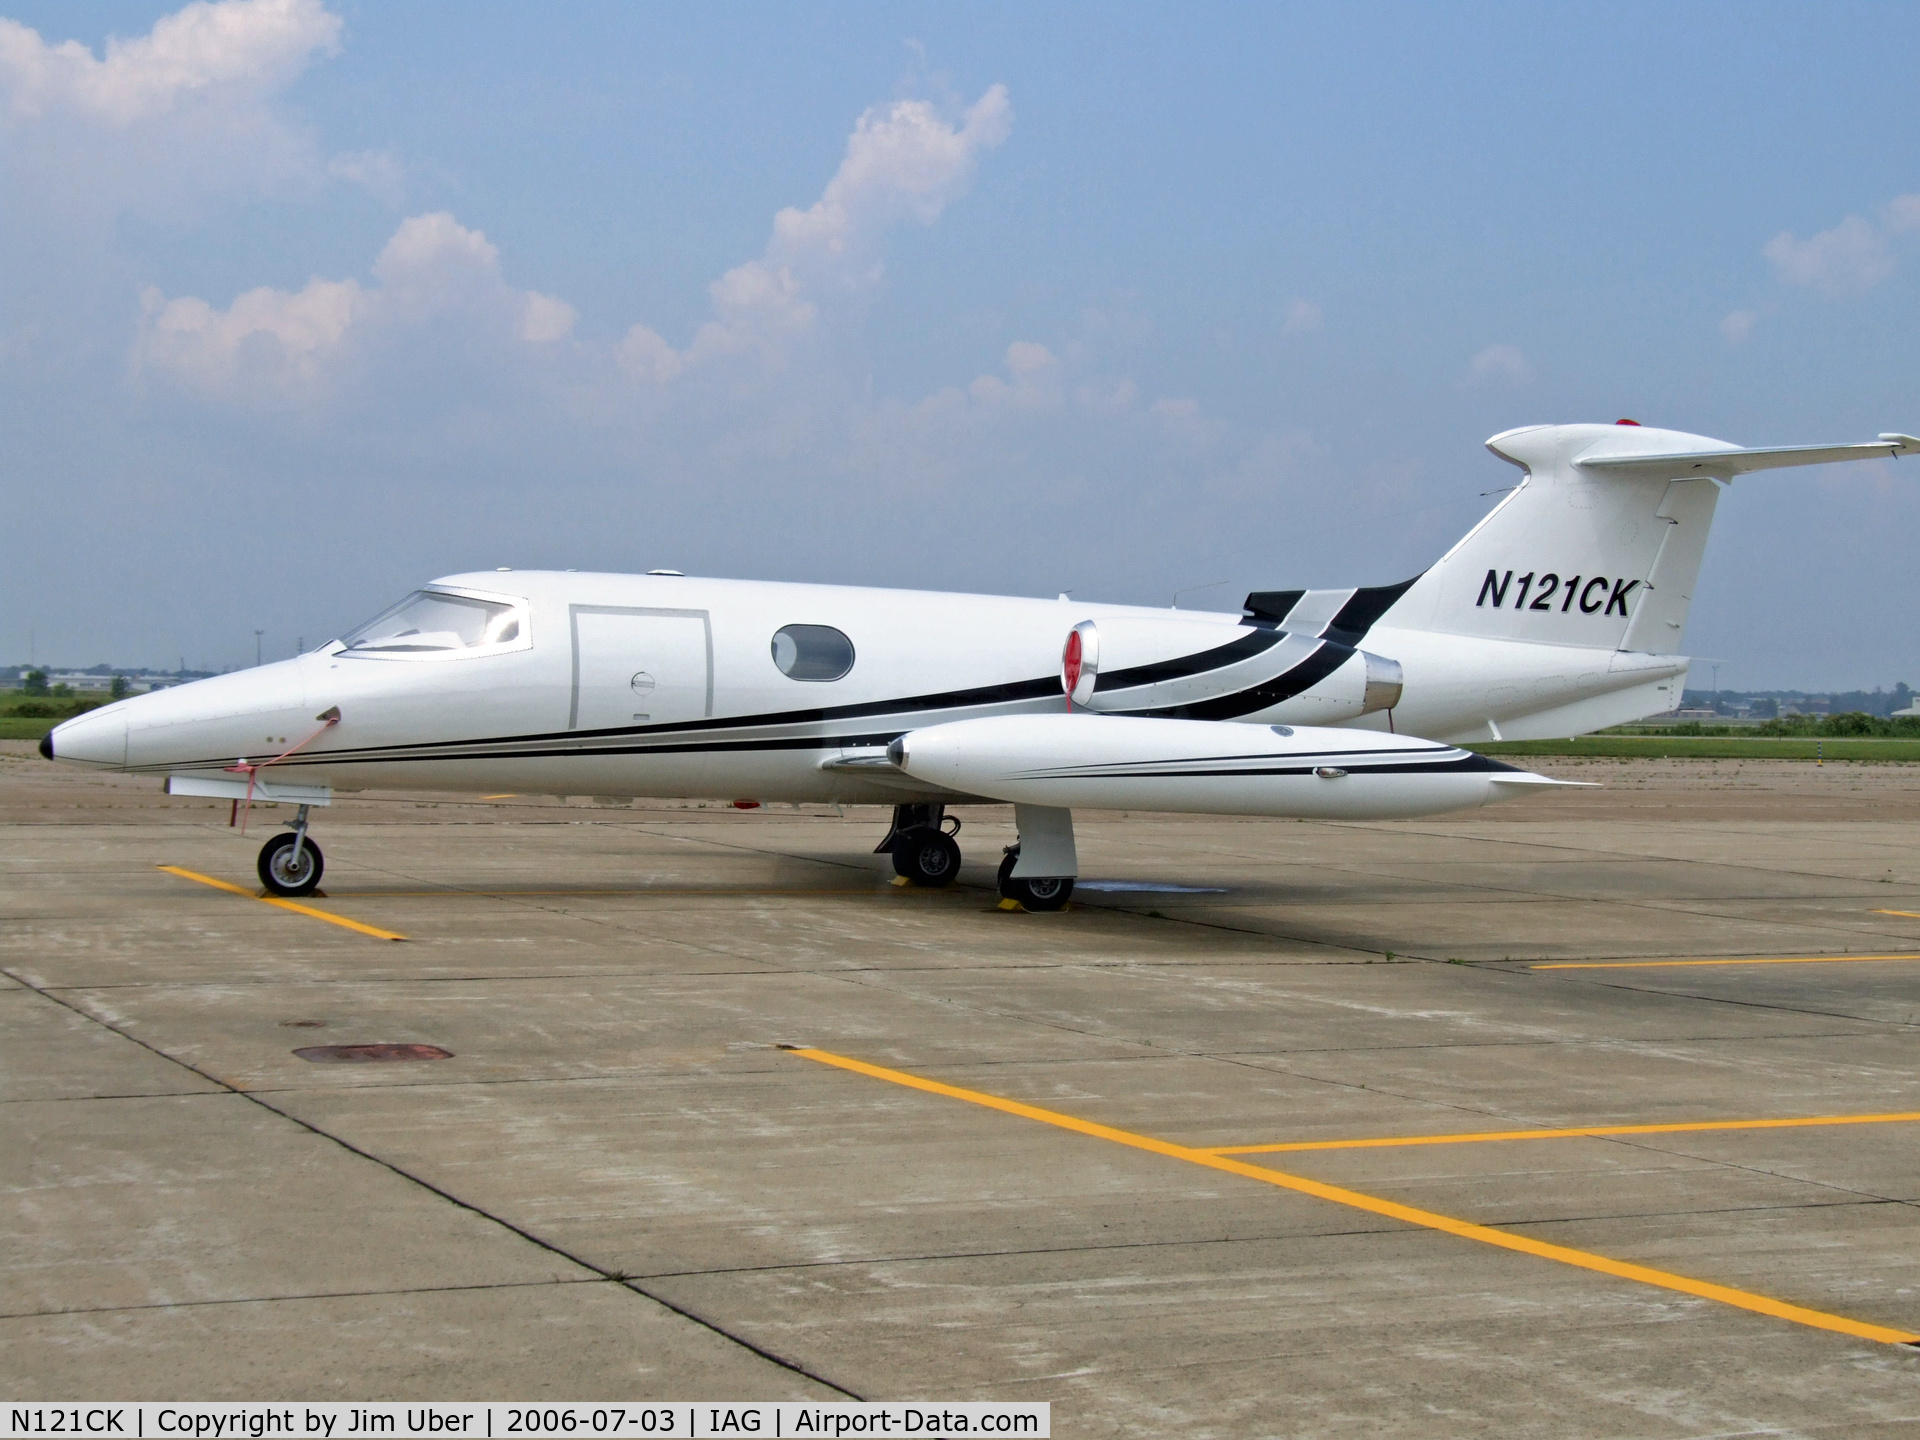 N121CK, 1965 Learjet 23 C/N 23-039, New plane at the 